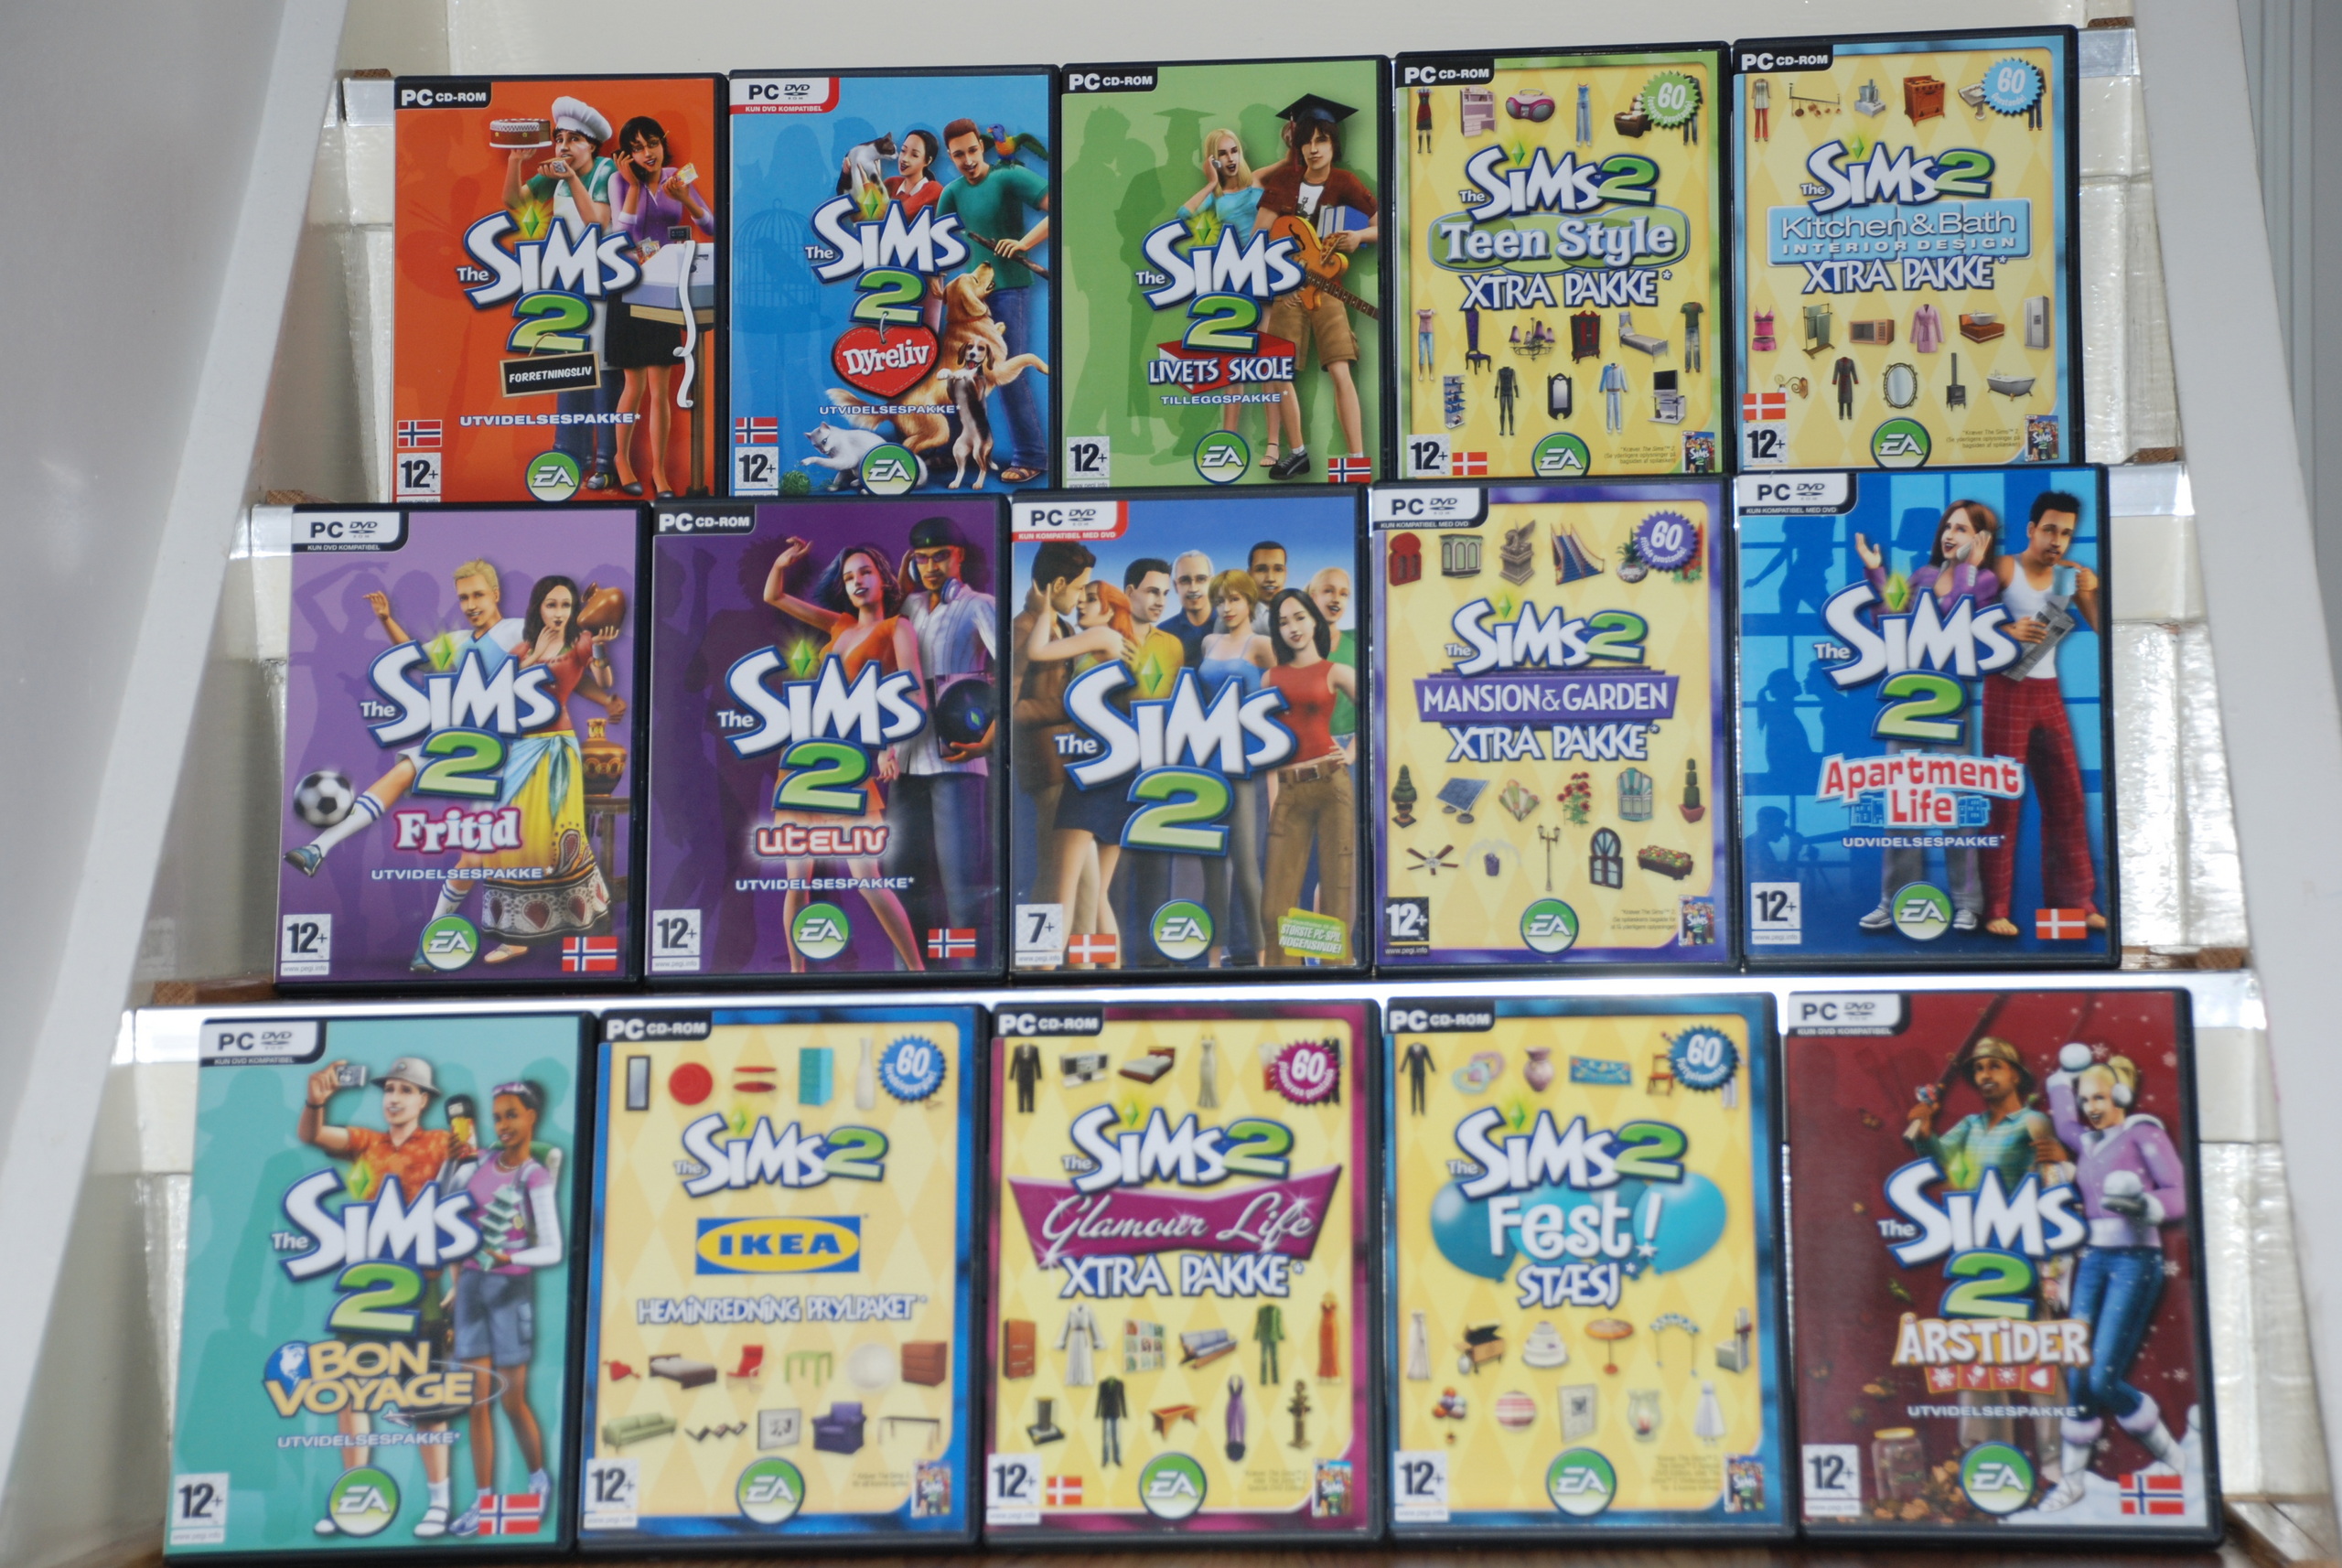 sims 2 pc download free full version